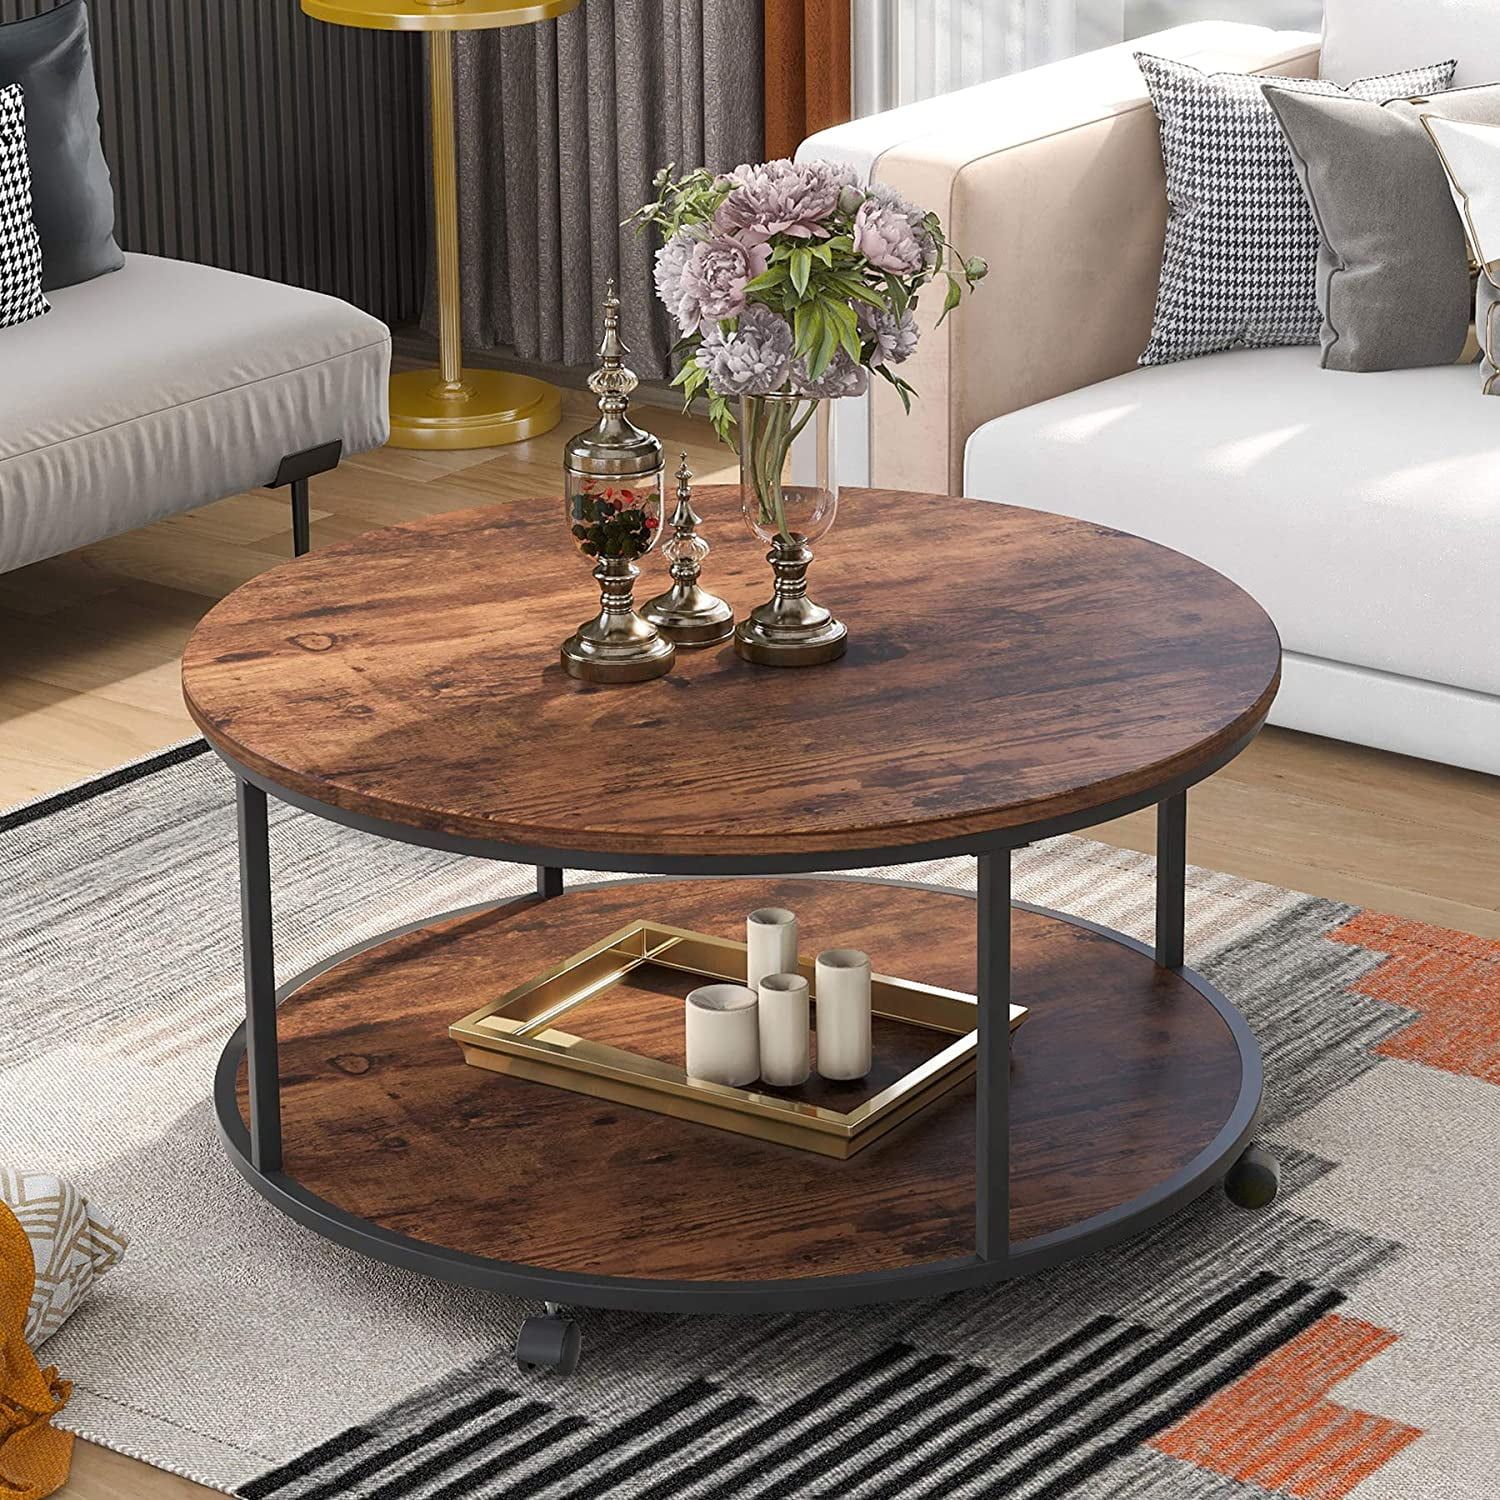 Rustic Round Coffee Table – Photos Throughout Coffee Tables With Round Wooden Tops (View 6 of 15)